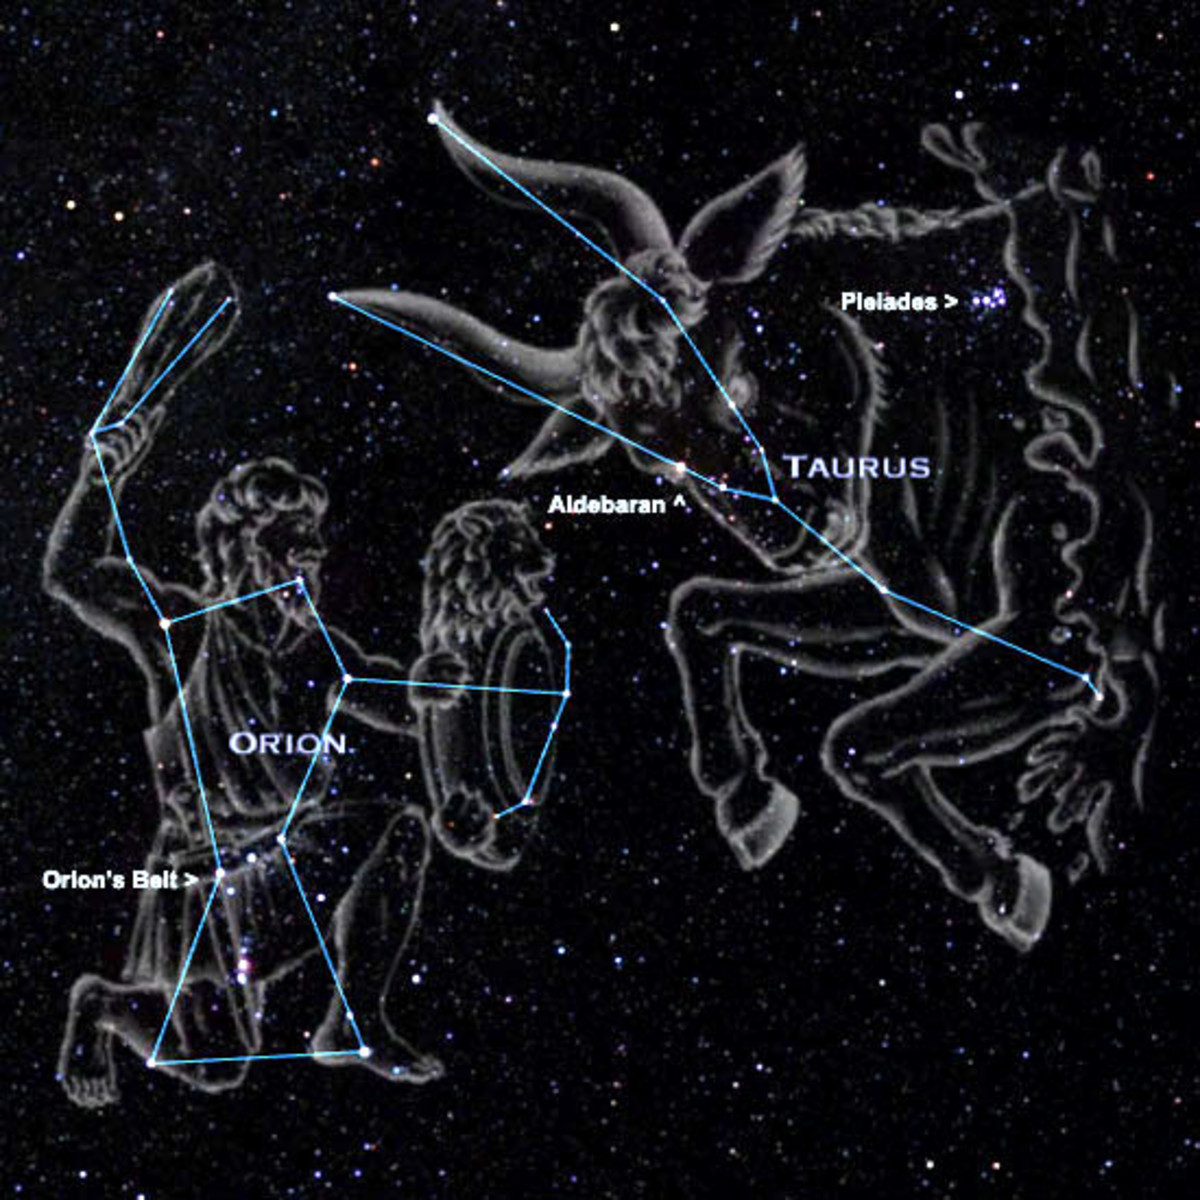 Story of Stargazing and Star Formation, Types of Nebula